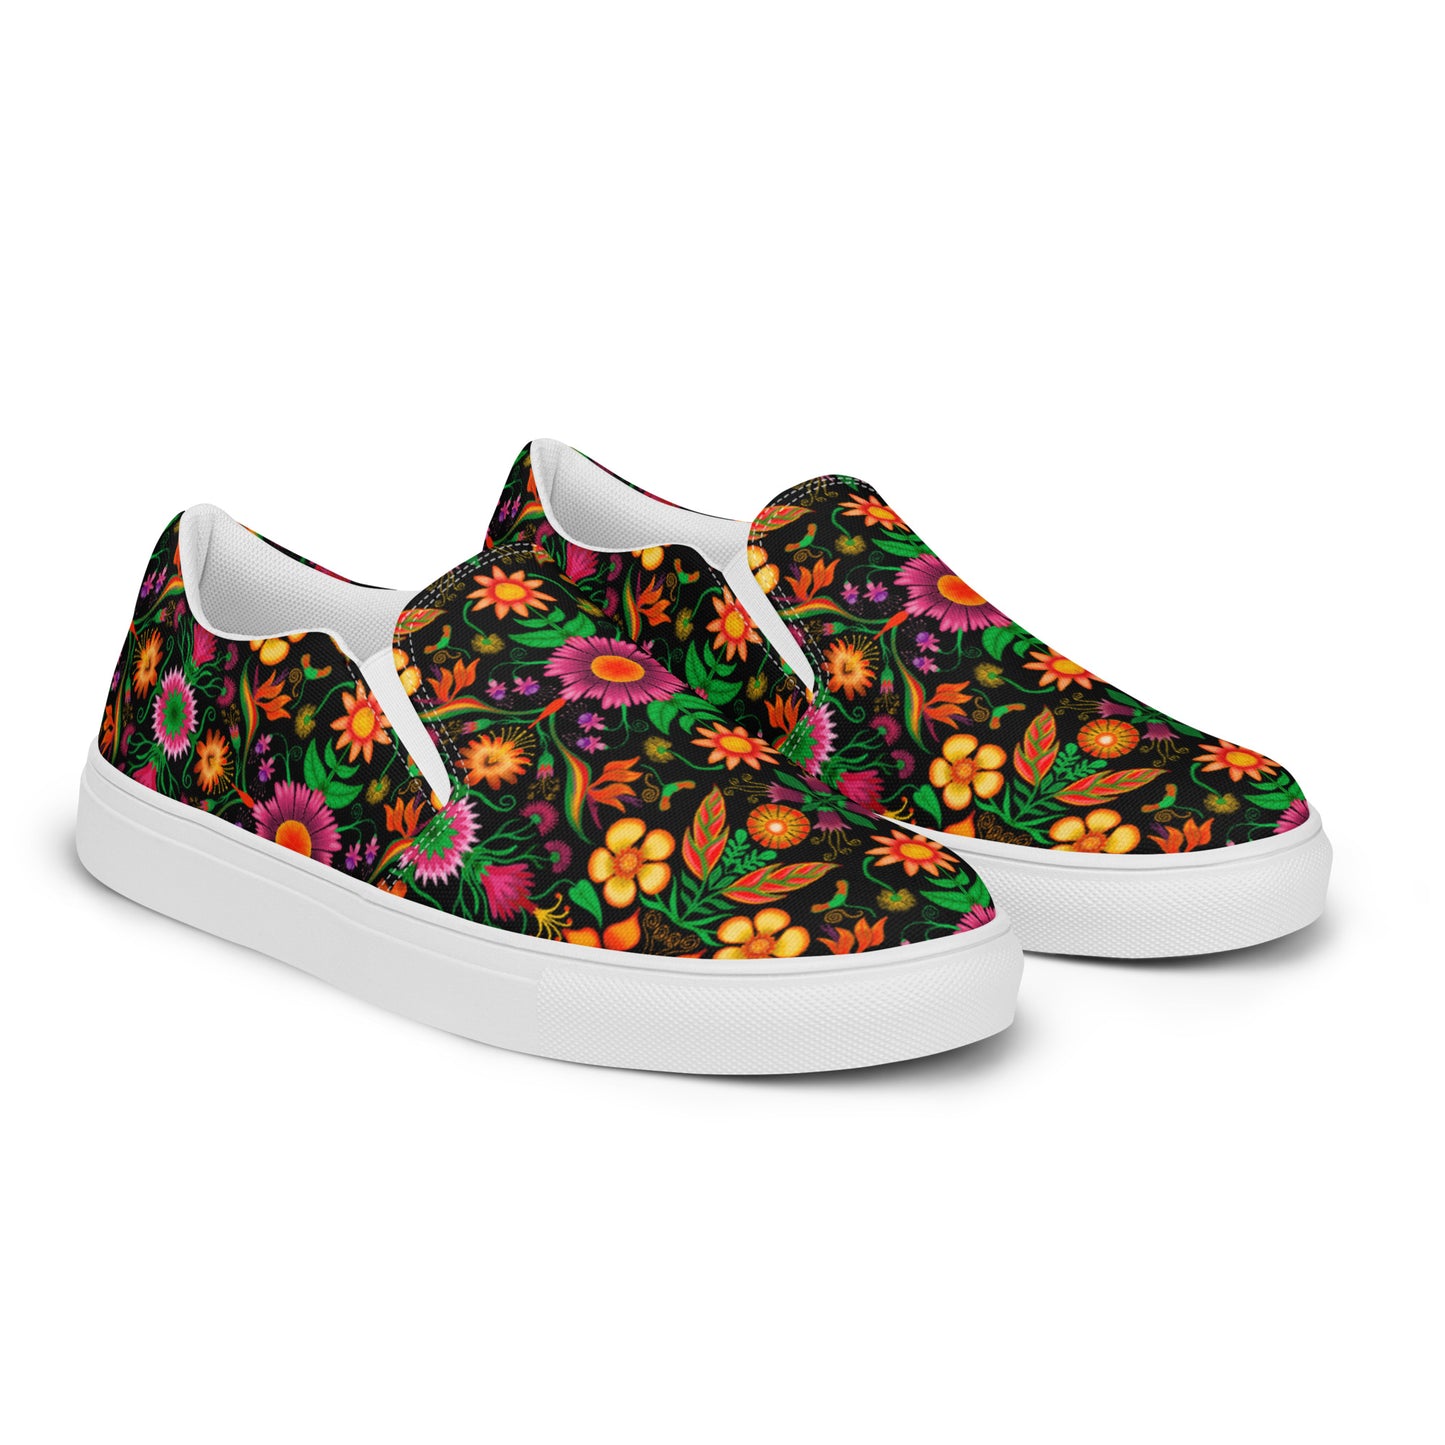 Wild flowers in a luxuriant jungle Women’s slip-on canvas shoes. Overview